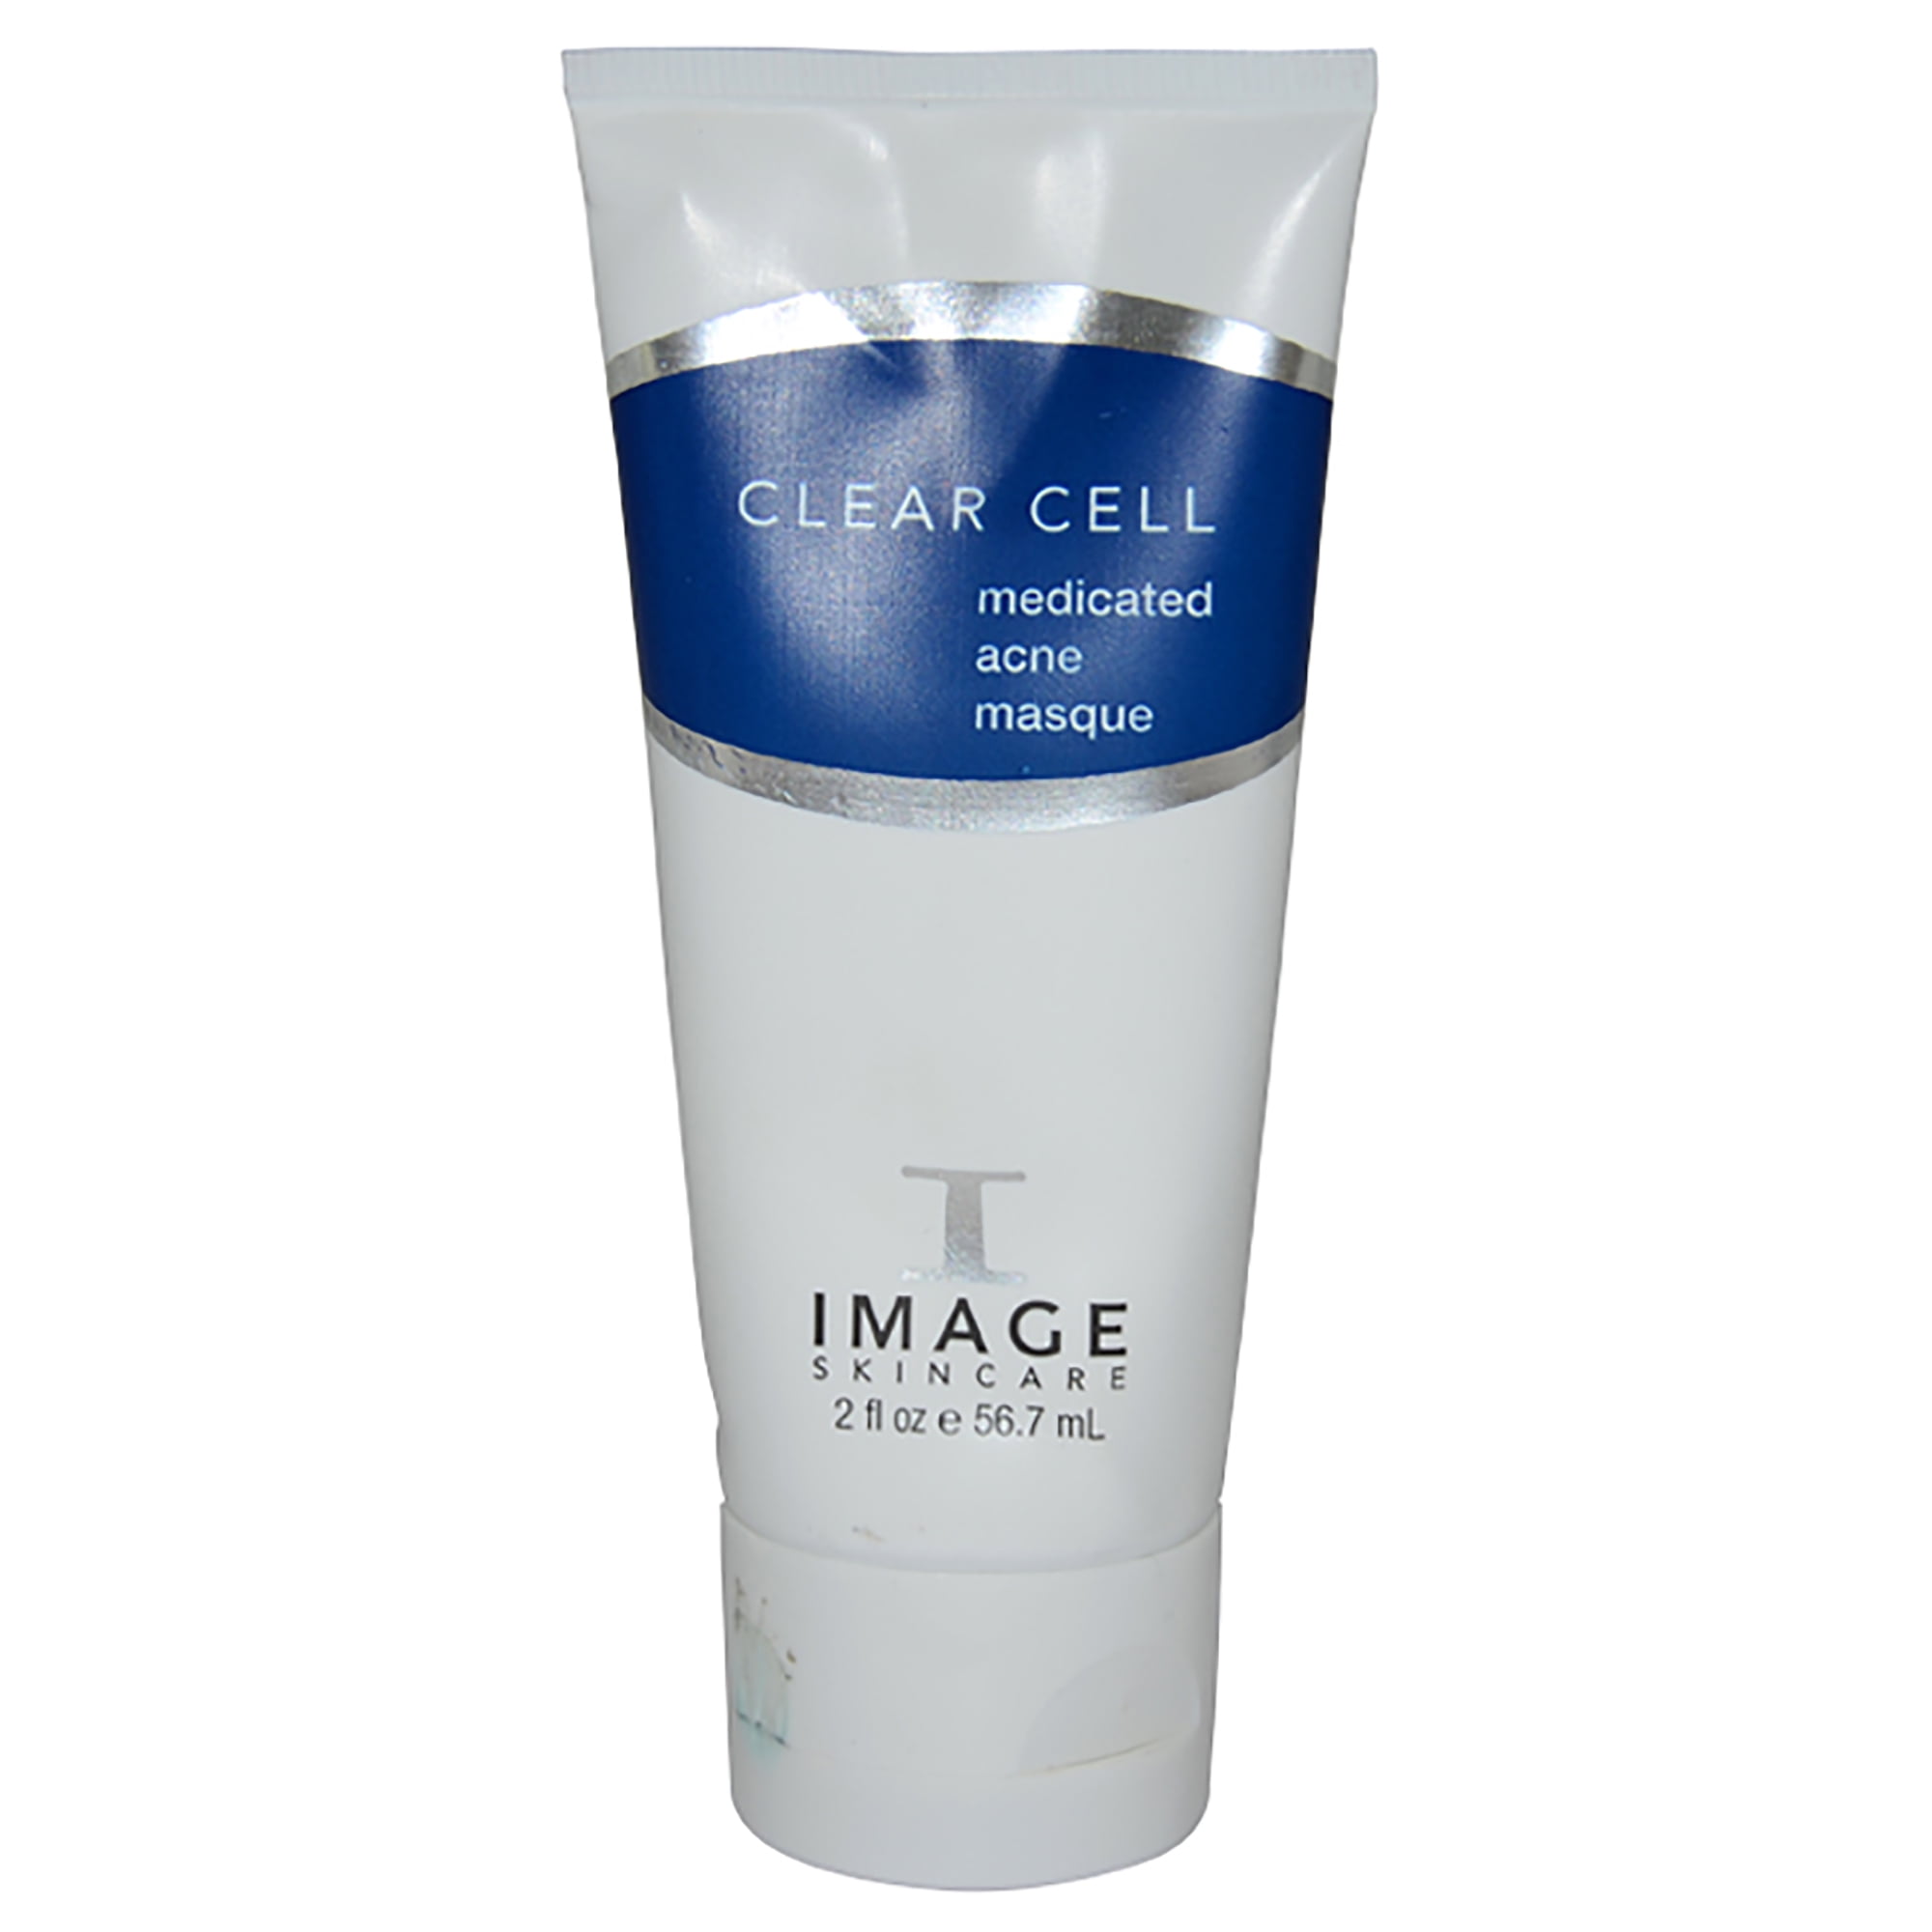 Clear Cell Medicated acne Masque. Image r Clear Cell Medicated acne Masque маска анти-акне с ана/вна и серой 56,7 мл. Маска Cell image. Clear Cell image Skincare.